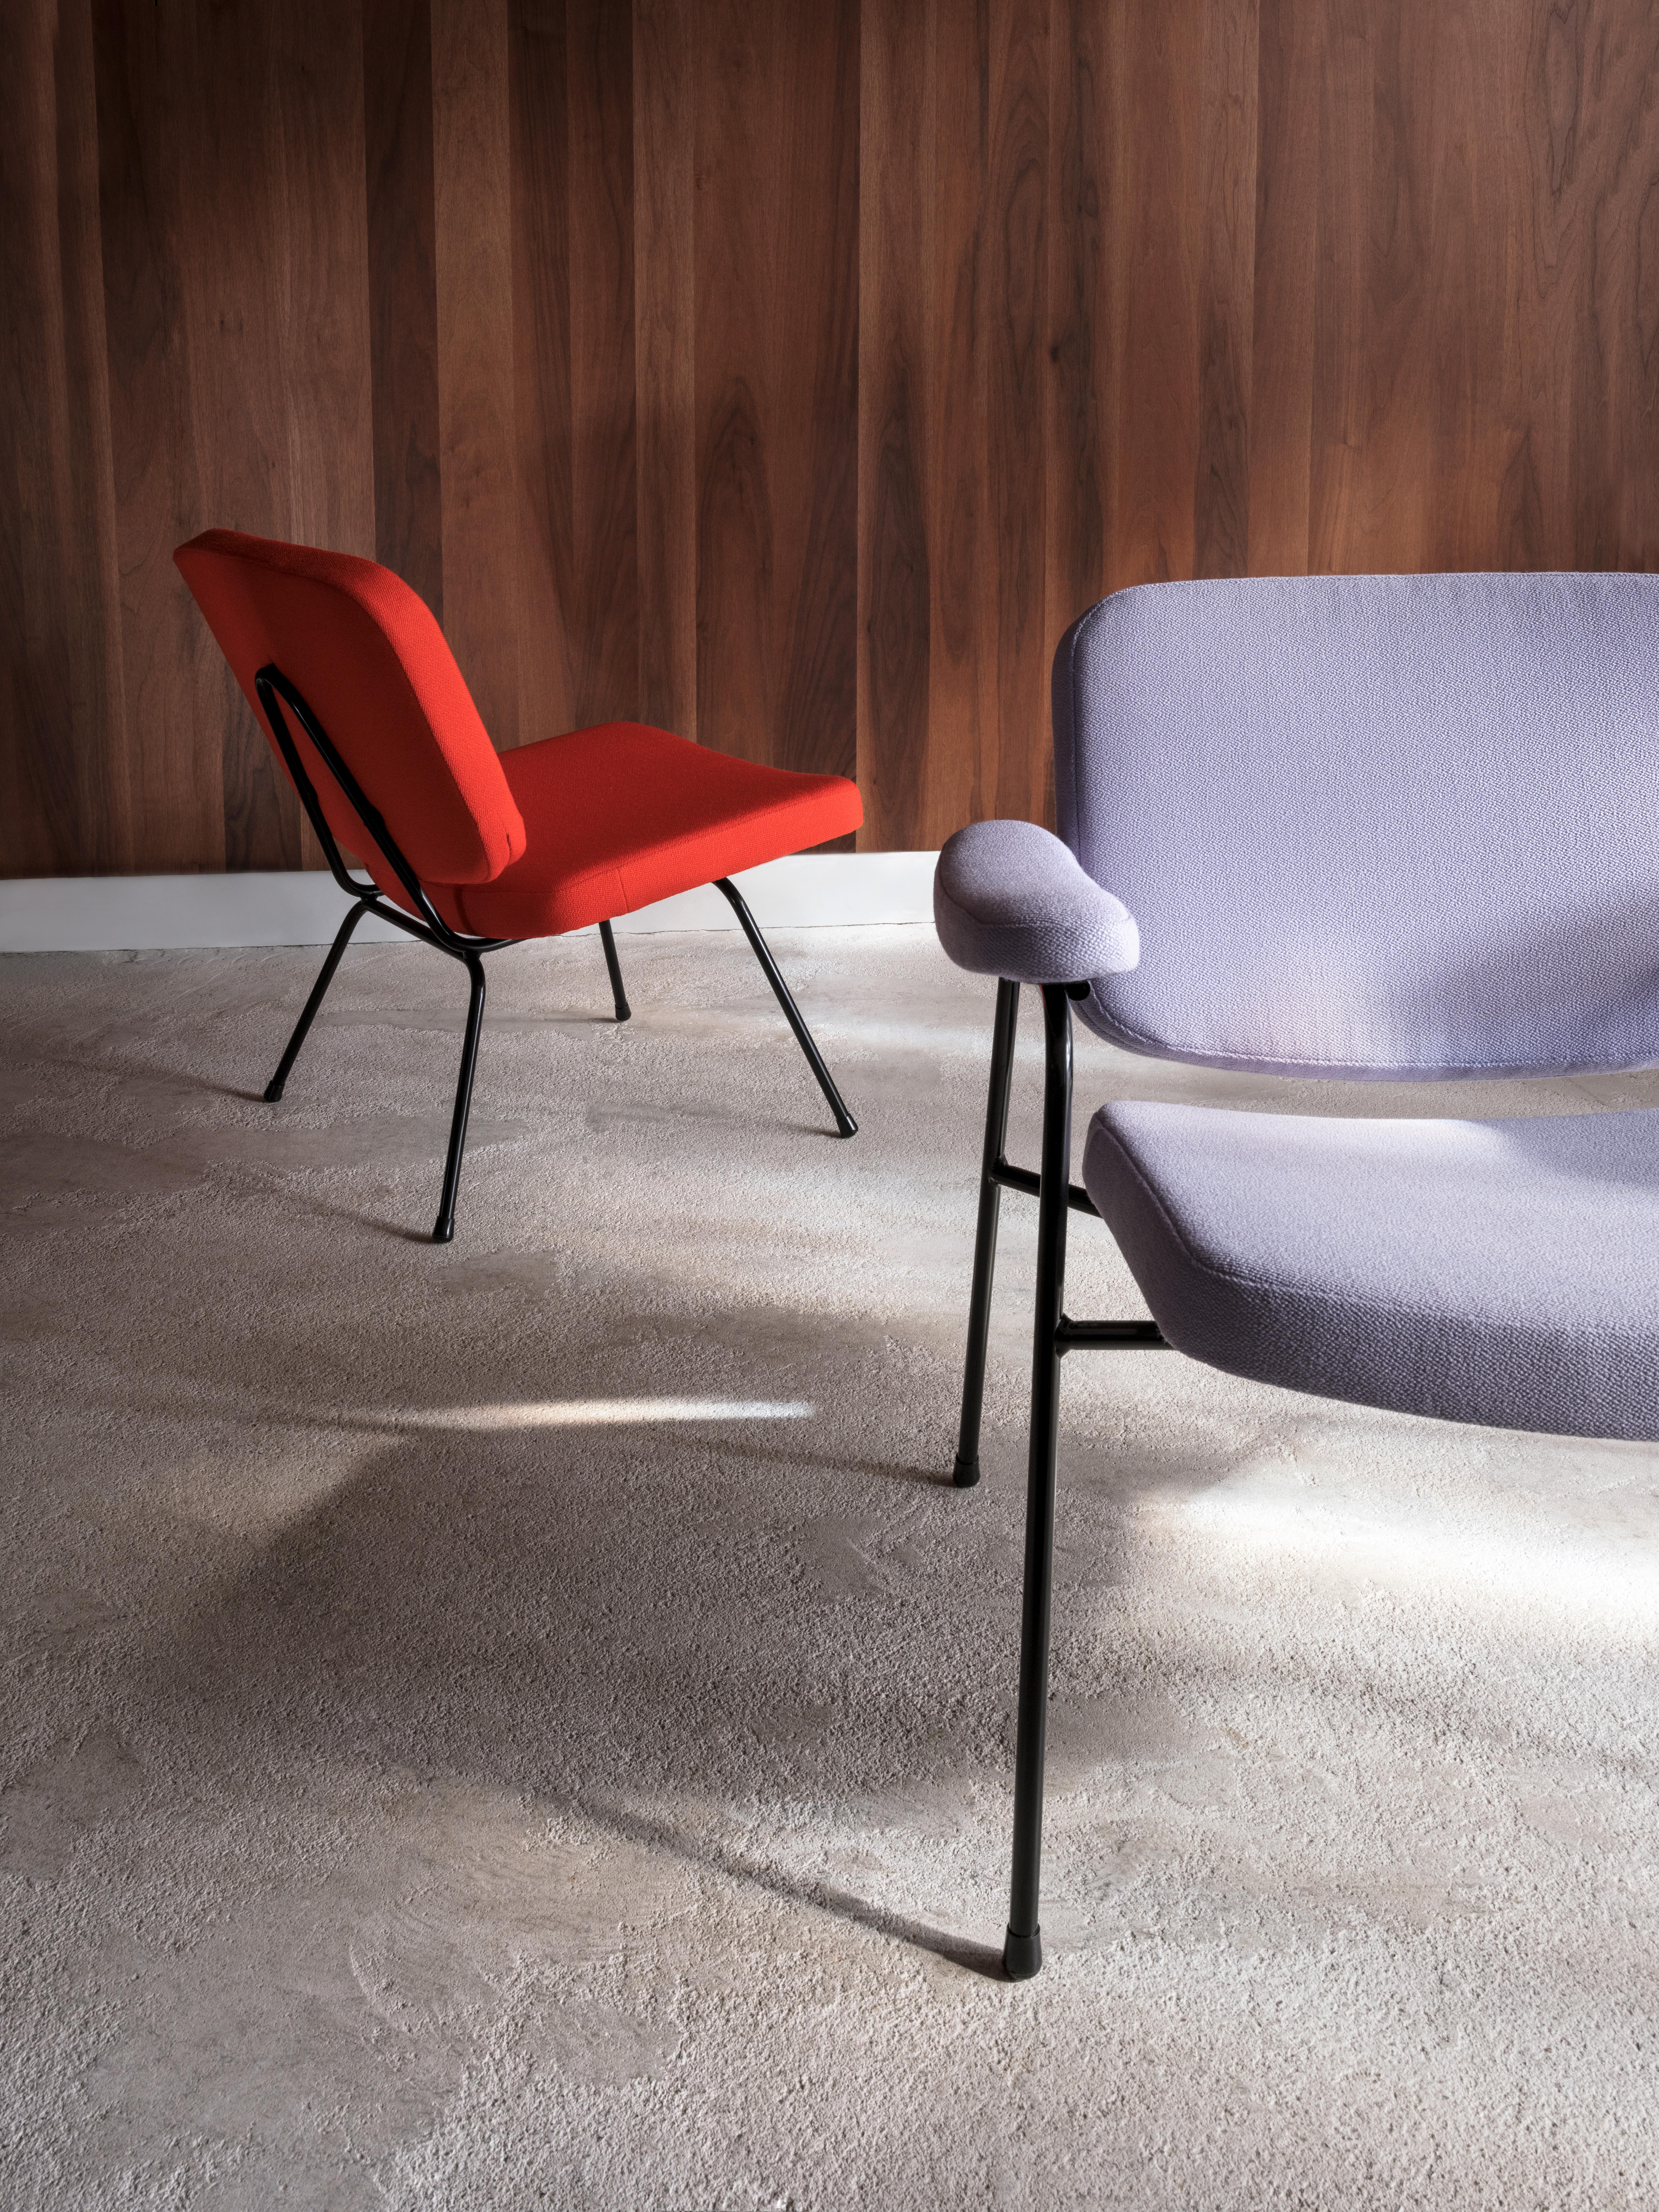 Product details

Introducing Pierre Paulin’s 1958 Mid-Century Modern design classic CM190. 

Elegantly minimalist armchair combined with modern comfort. 

Available in two versions: Moulin Lounge and Moulin Lounge with armrests. 

Upholstery